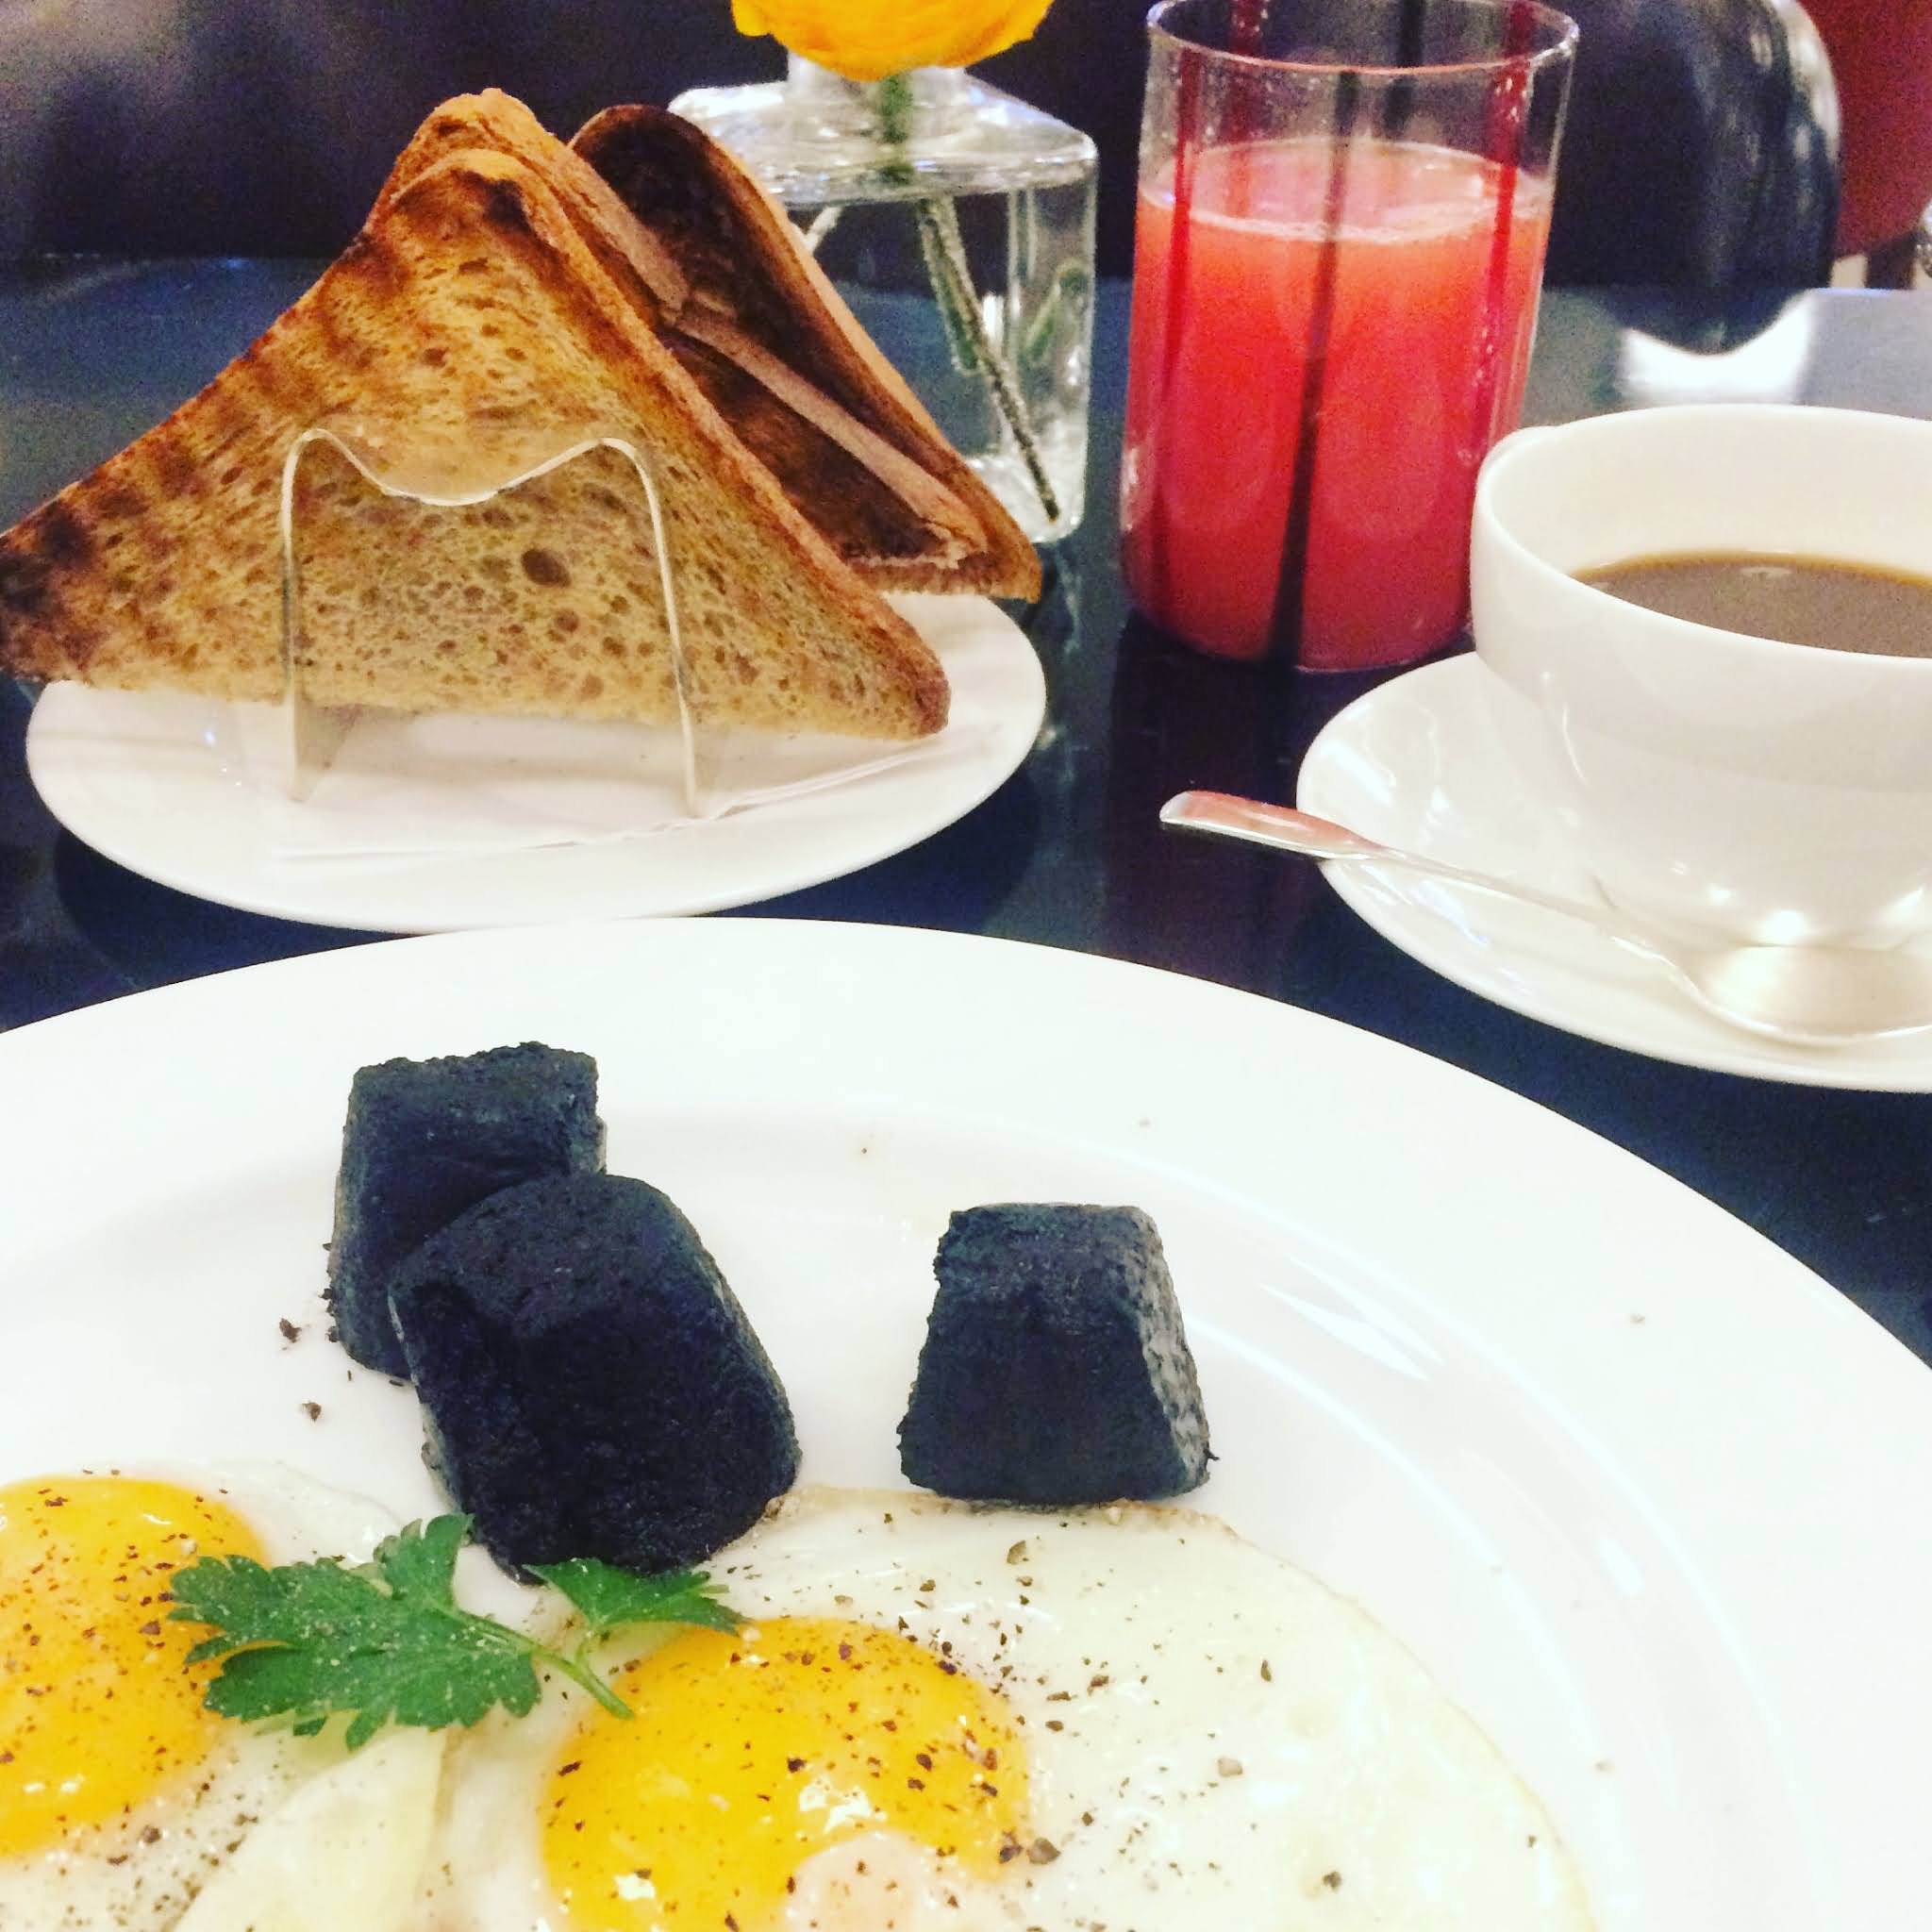 A plate of Fried eggs and black pudding at Hotel Cafe Royal, one of the best places for an early breakfast in london